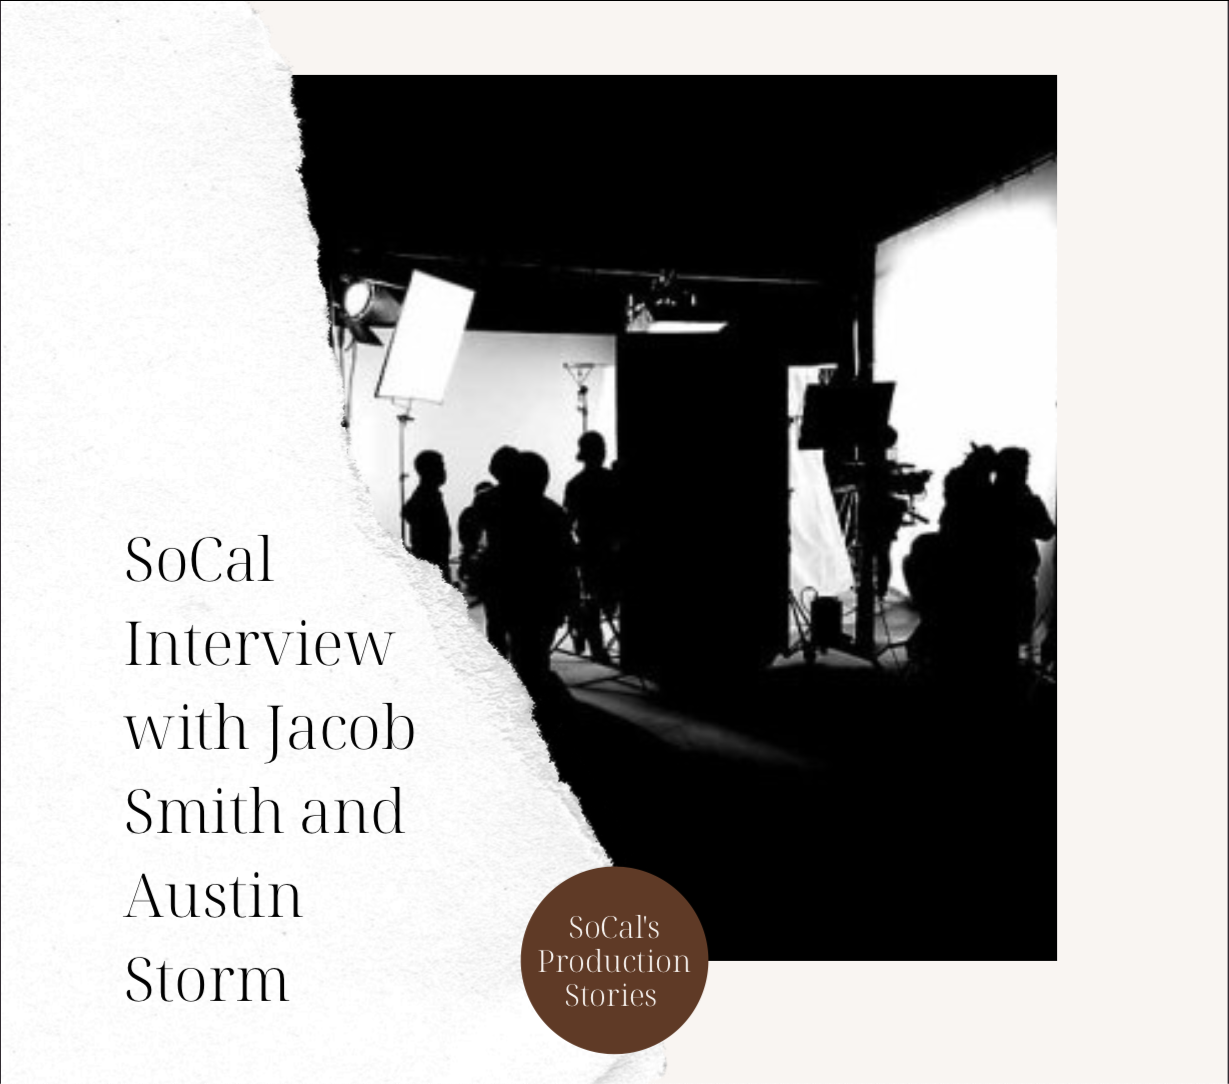 SoCal Interview with Jacob Smith and Austin Storm